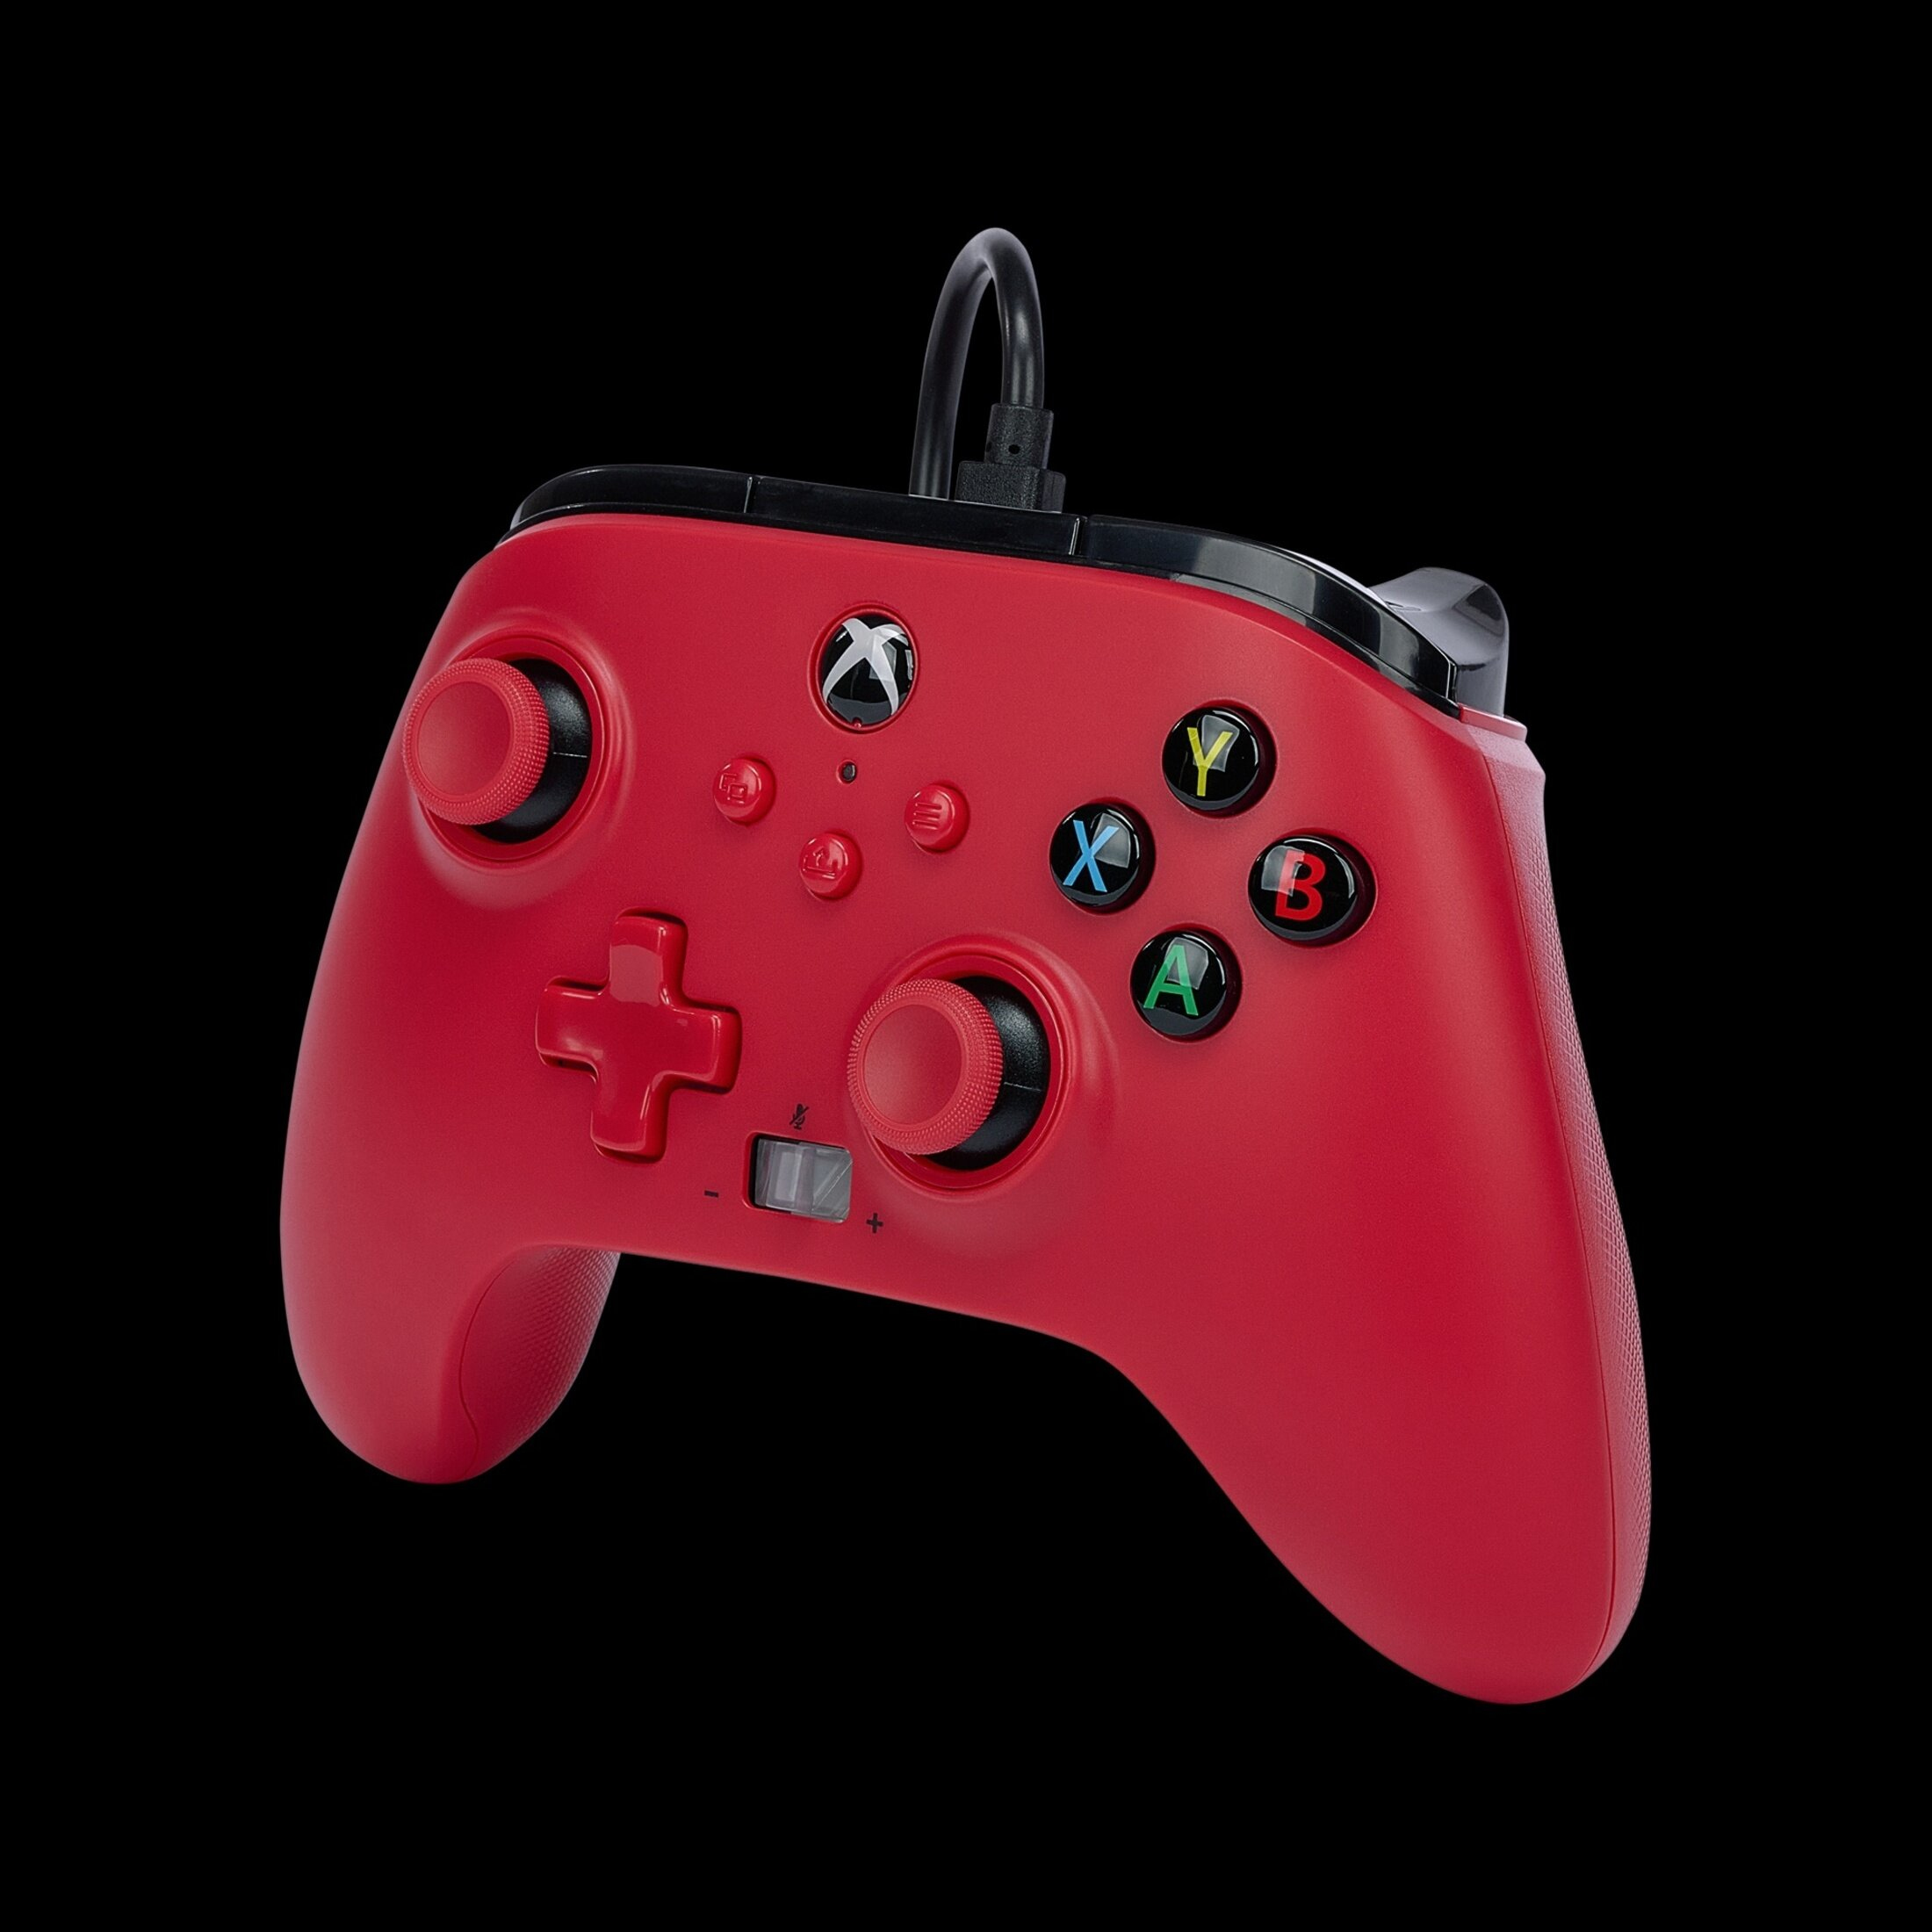 PowerA Enhanced Wired Controller for Xbox Series X